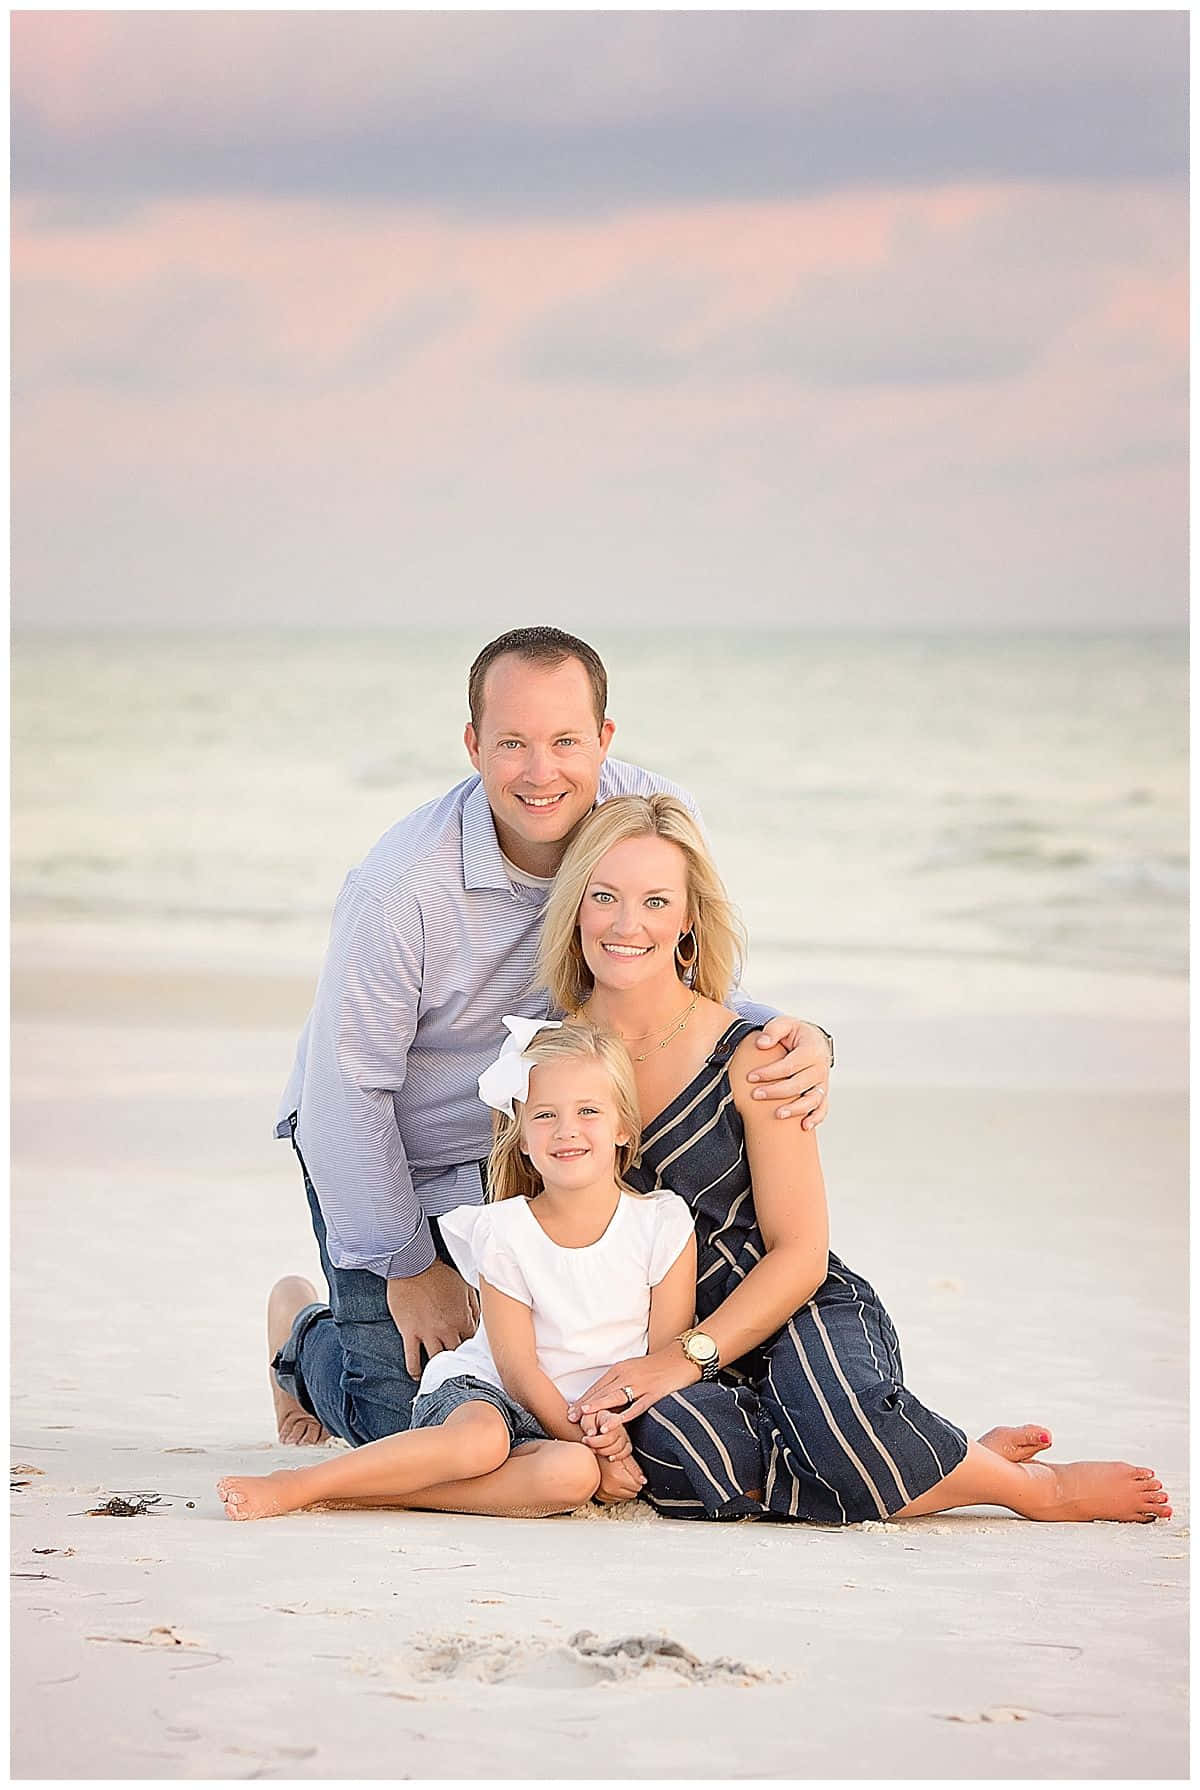 A Family Poses On The Beach For A Family Portrait